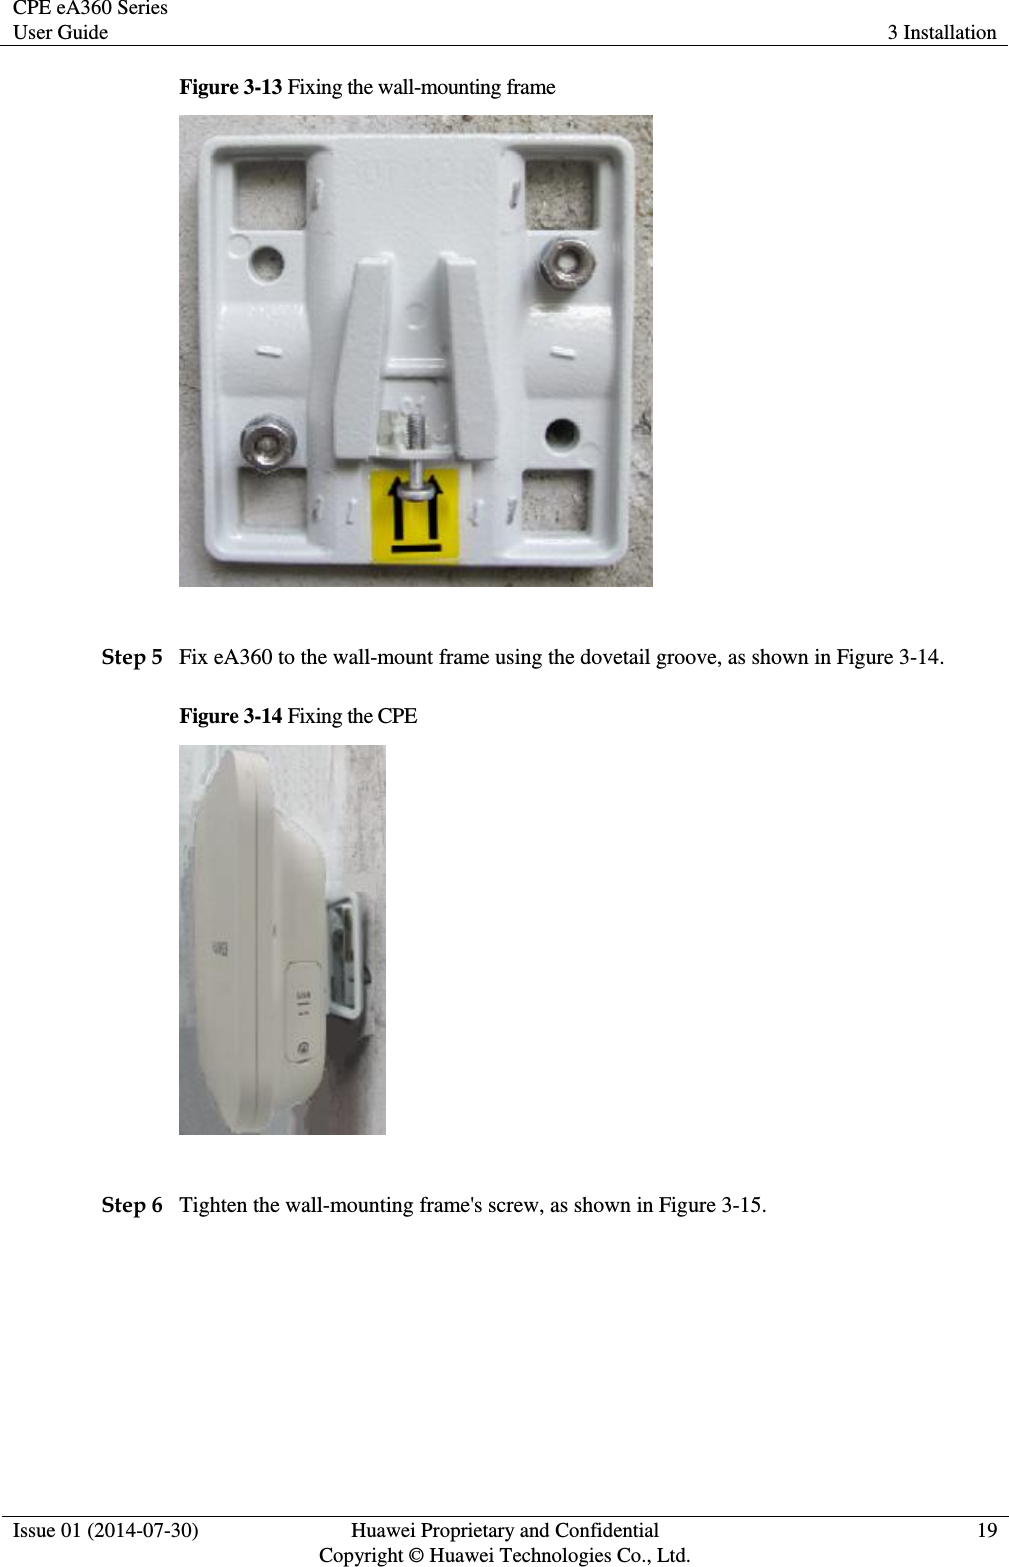 CPE eA360 Series User Guide 3 Installation  Issue 01 (2014-07-30) Huawei Proprietary and Confidential                                     Copyright © Huawei Technologies Co., Ltd. 19  Figure 3-13 Fixing the wall-mounting frame   Step 5 Fix eA360 to the wall-mount frame using the dovetail groove, as shown in Figure 3-14. Figure 3-14 Fixing the CPE   Step 6 Tighten the wall-mounting frame&apos;s screw, as shown in Figure 3-15.   